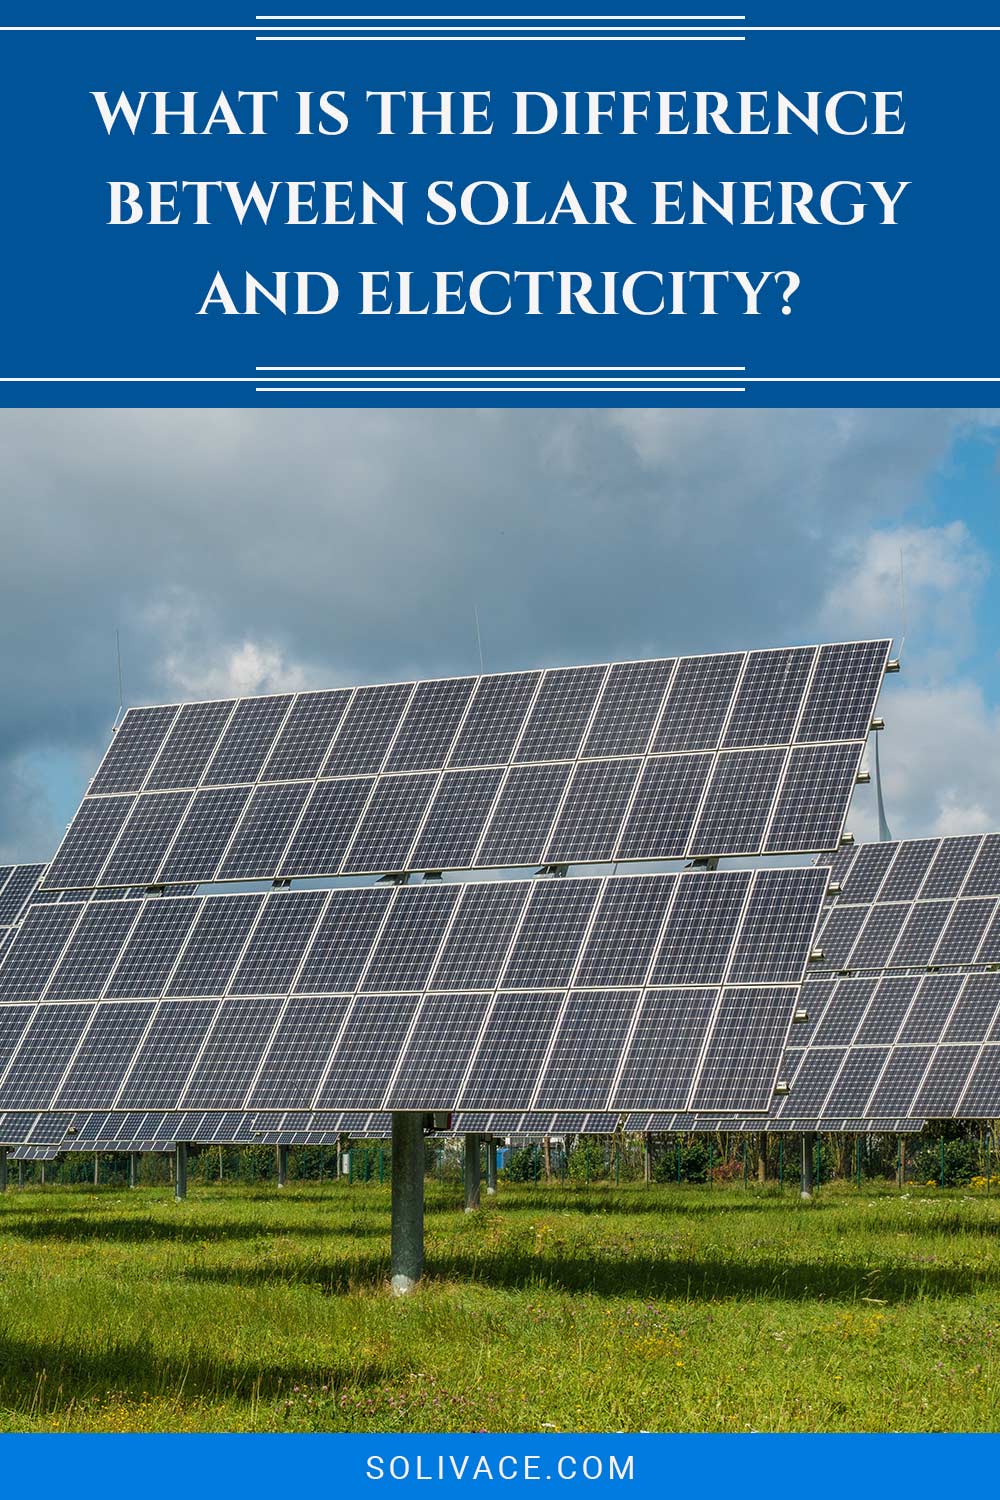 What Is The Difference Between Solar Energy And Electricity?